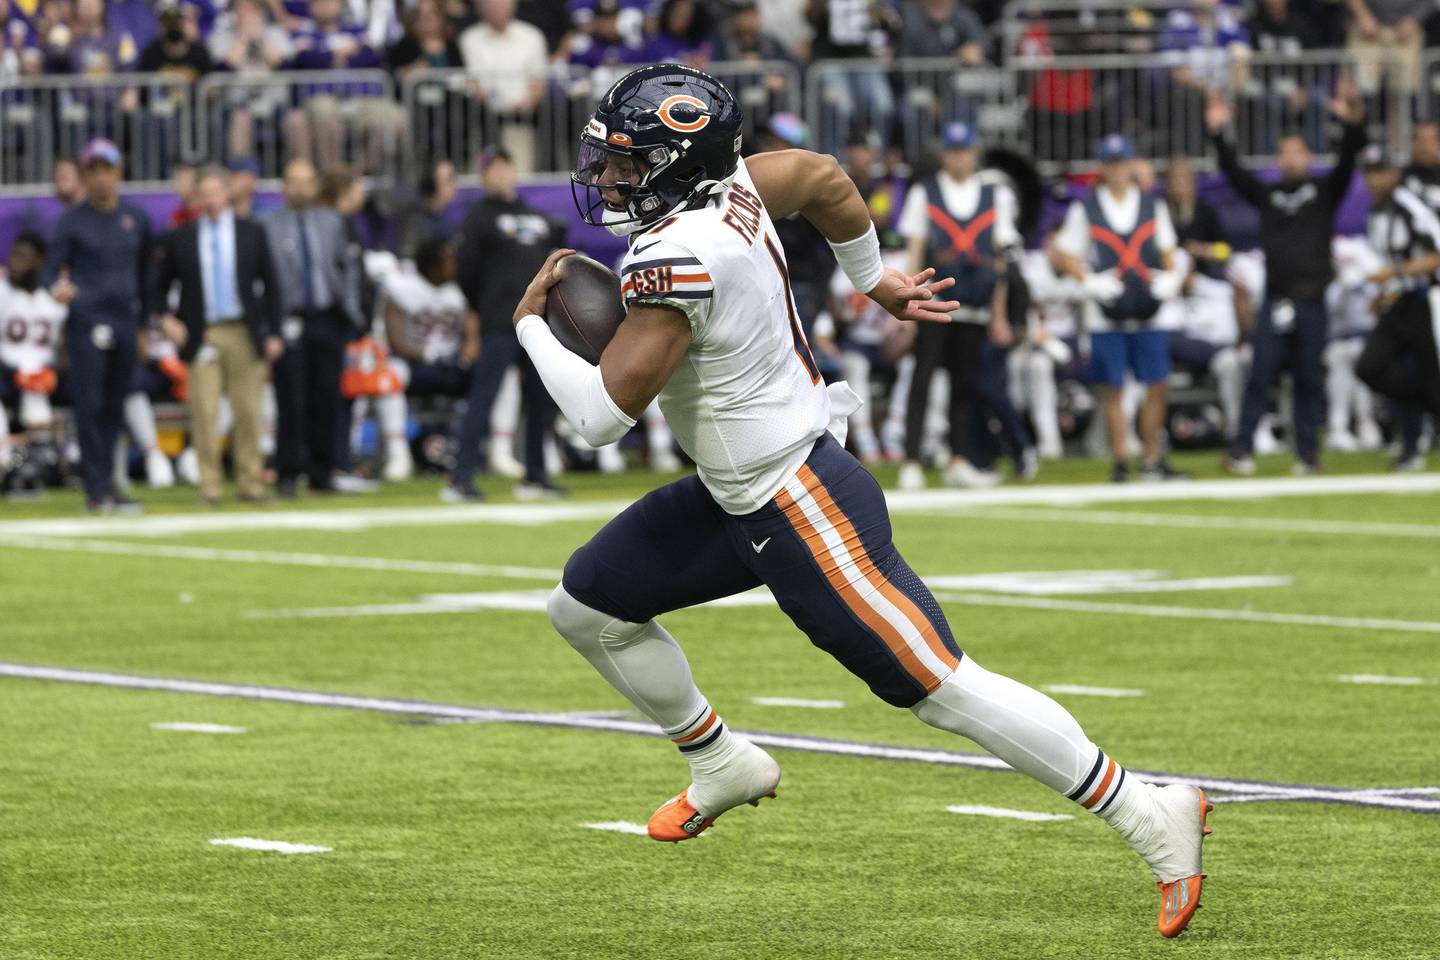 Bears quarterback Justin Fields runs the field on his way to what would be a nullified touchdown after an illegal block by wide receiver Ihmir Smith-Marsette during the fourth quarter against the Vikings at U.S Bank Stadium on Oct. 9, 2022.